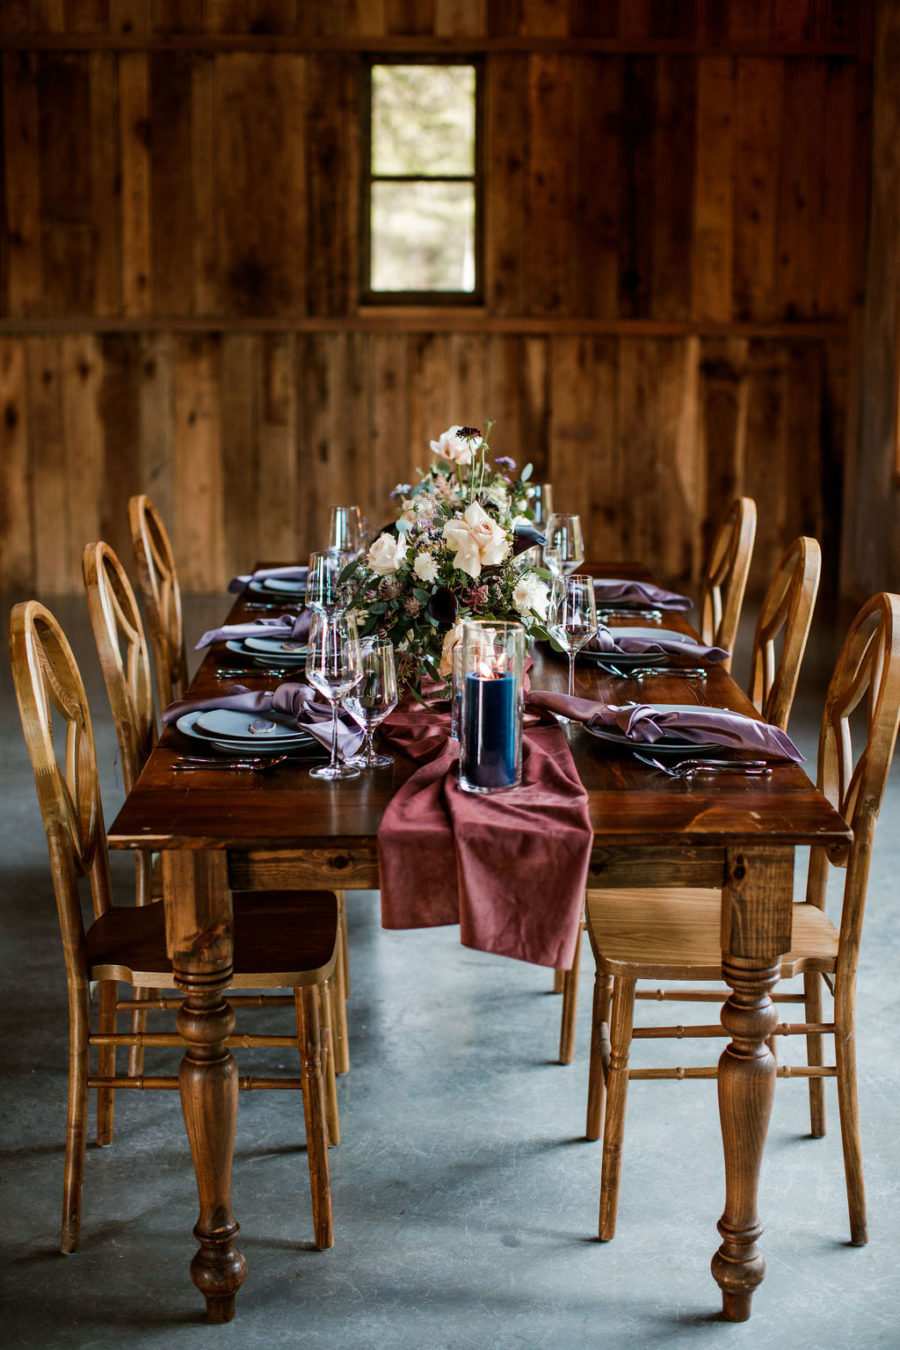 Southern Events Rentals wedding decor: Moody Spring Styled Shoot and Cedarmont Farm featured on Nashville Bride Guide